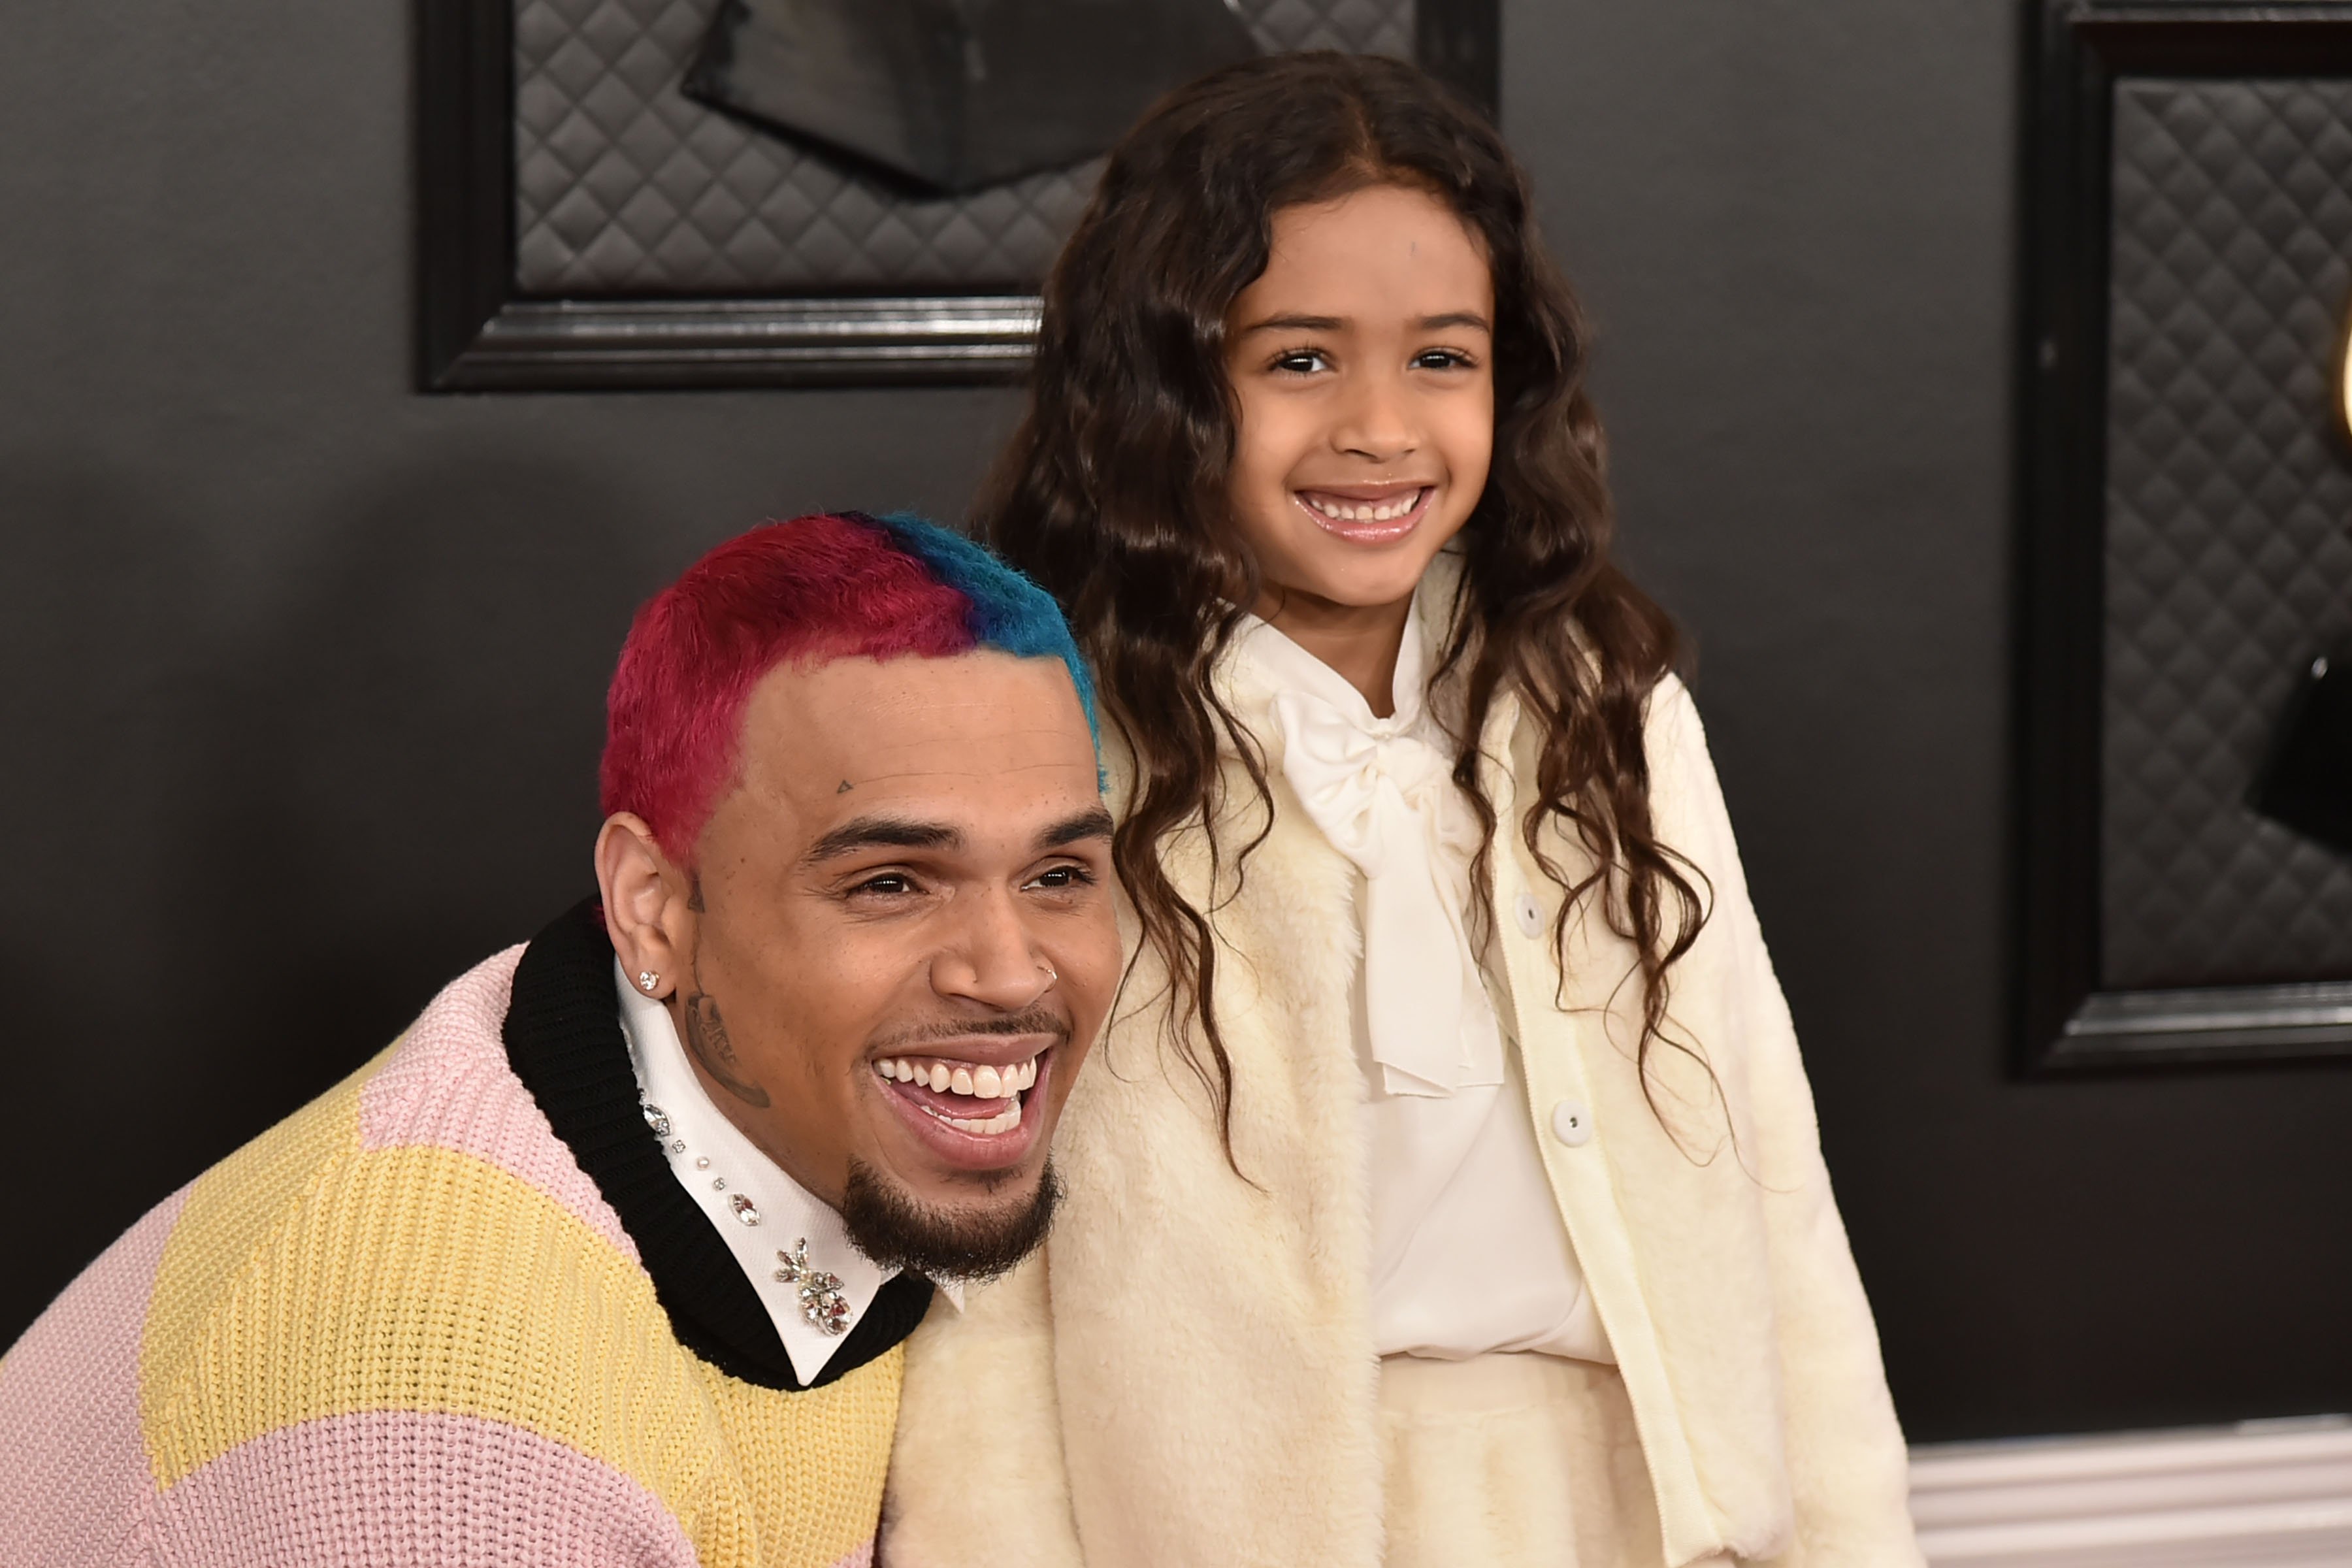 Chris Brown and Royalty Brown at the 62nd Annual Grammy Awards at Staples Center on January 26, 2020 in Los Angeles, California |Source: Getty Images